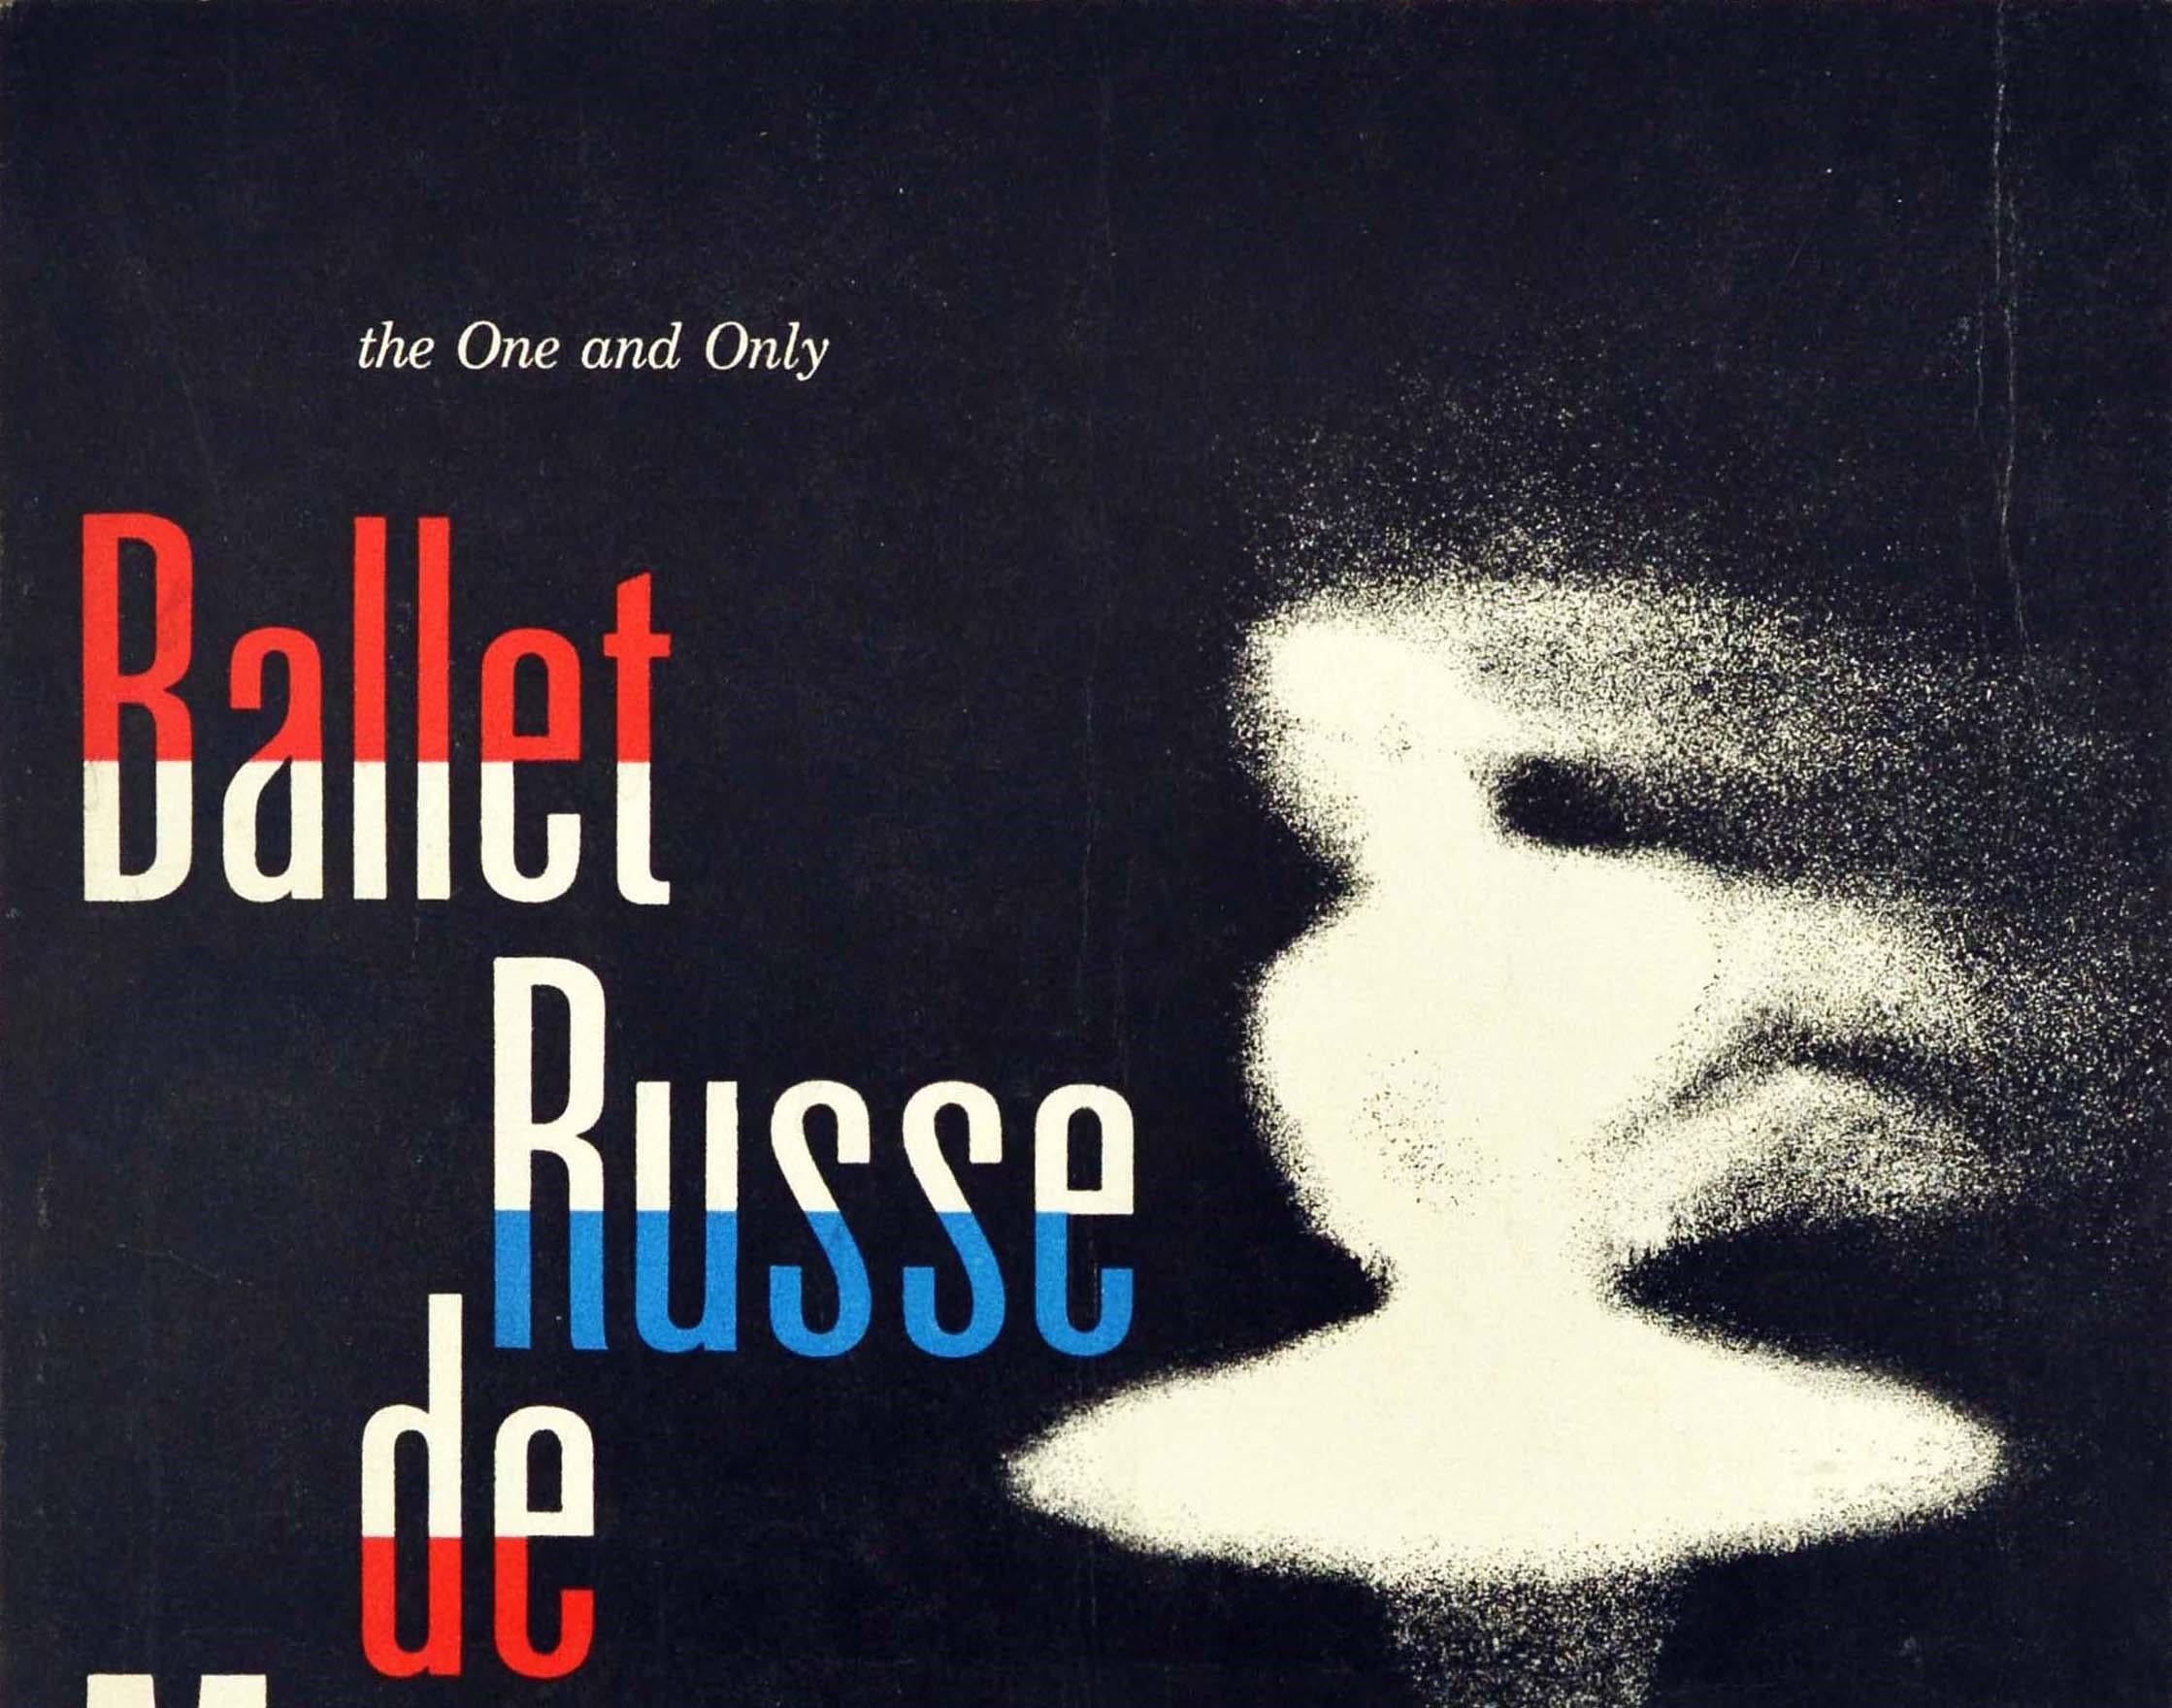 Original vintage event poster advertising The one and only Ballet Russe de Monte Carlo directed by S. J. Denham (Sergei Ivanovich Dokouchaiev; 1897-1970) at the California Oakland Auditorium Theatre at 8:30pm on Wednesday 7 February featuring a